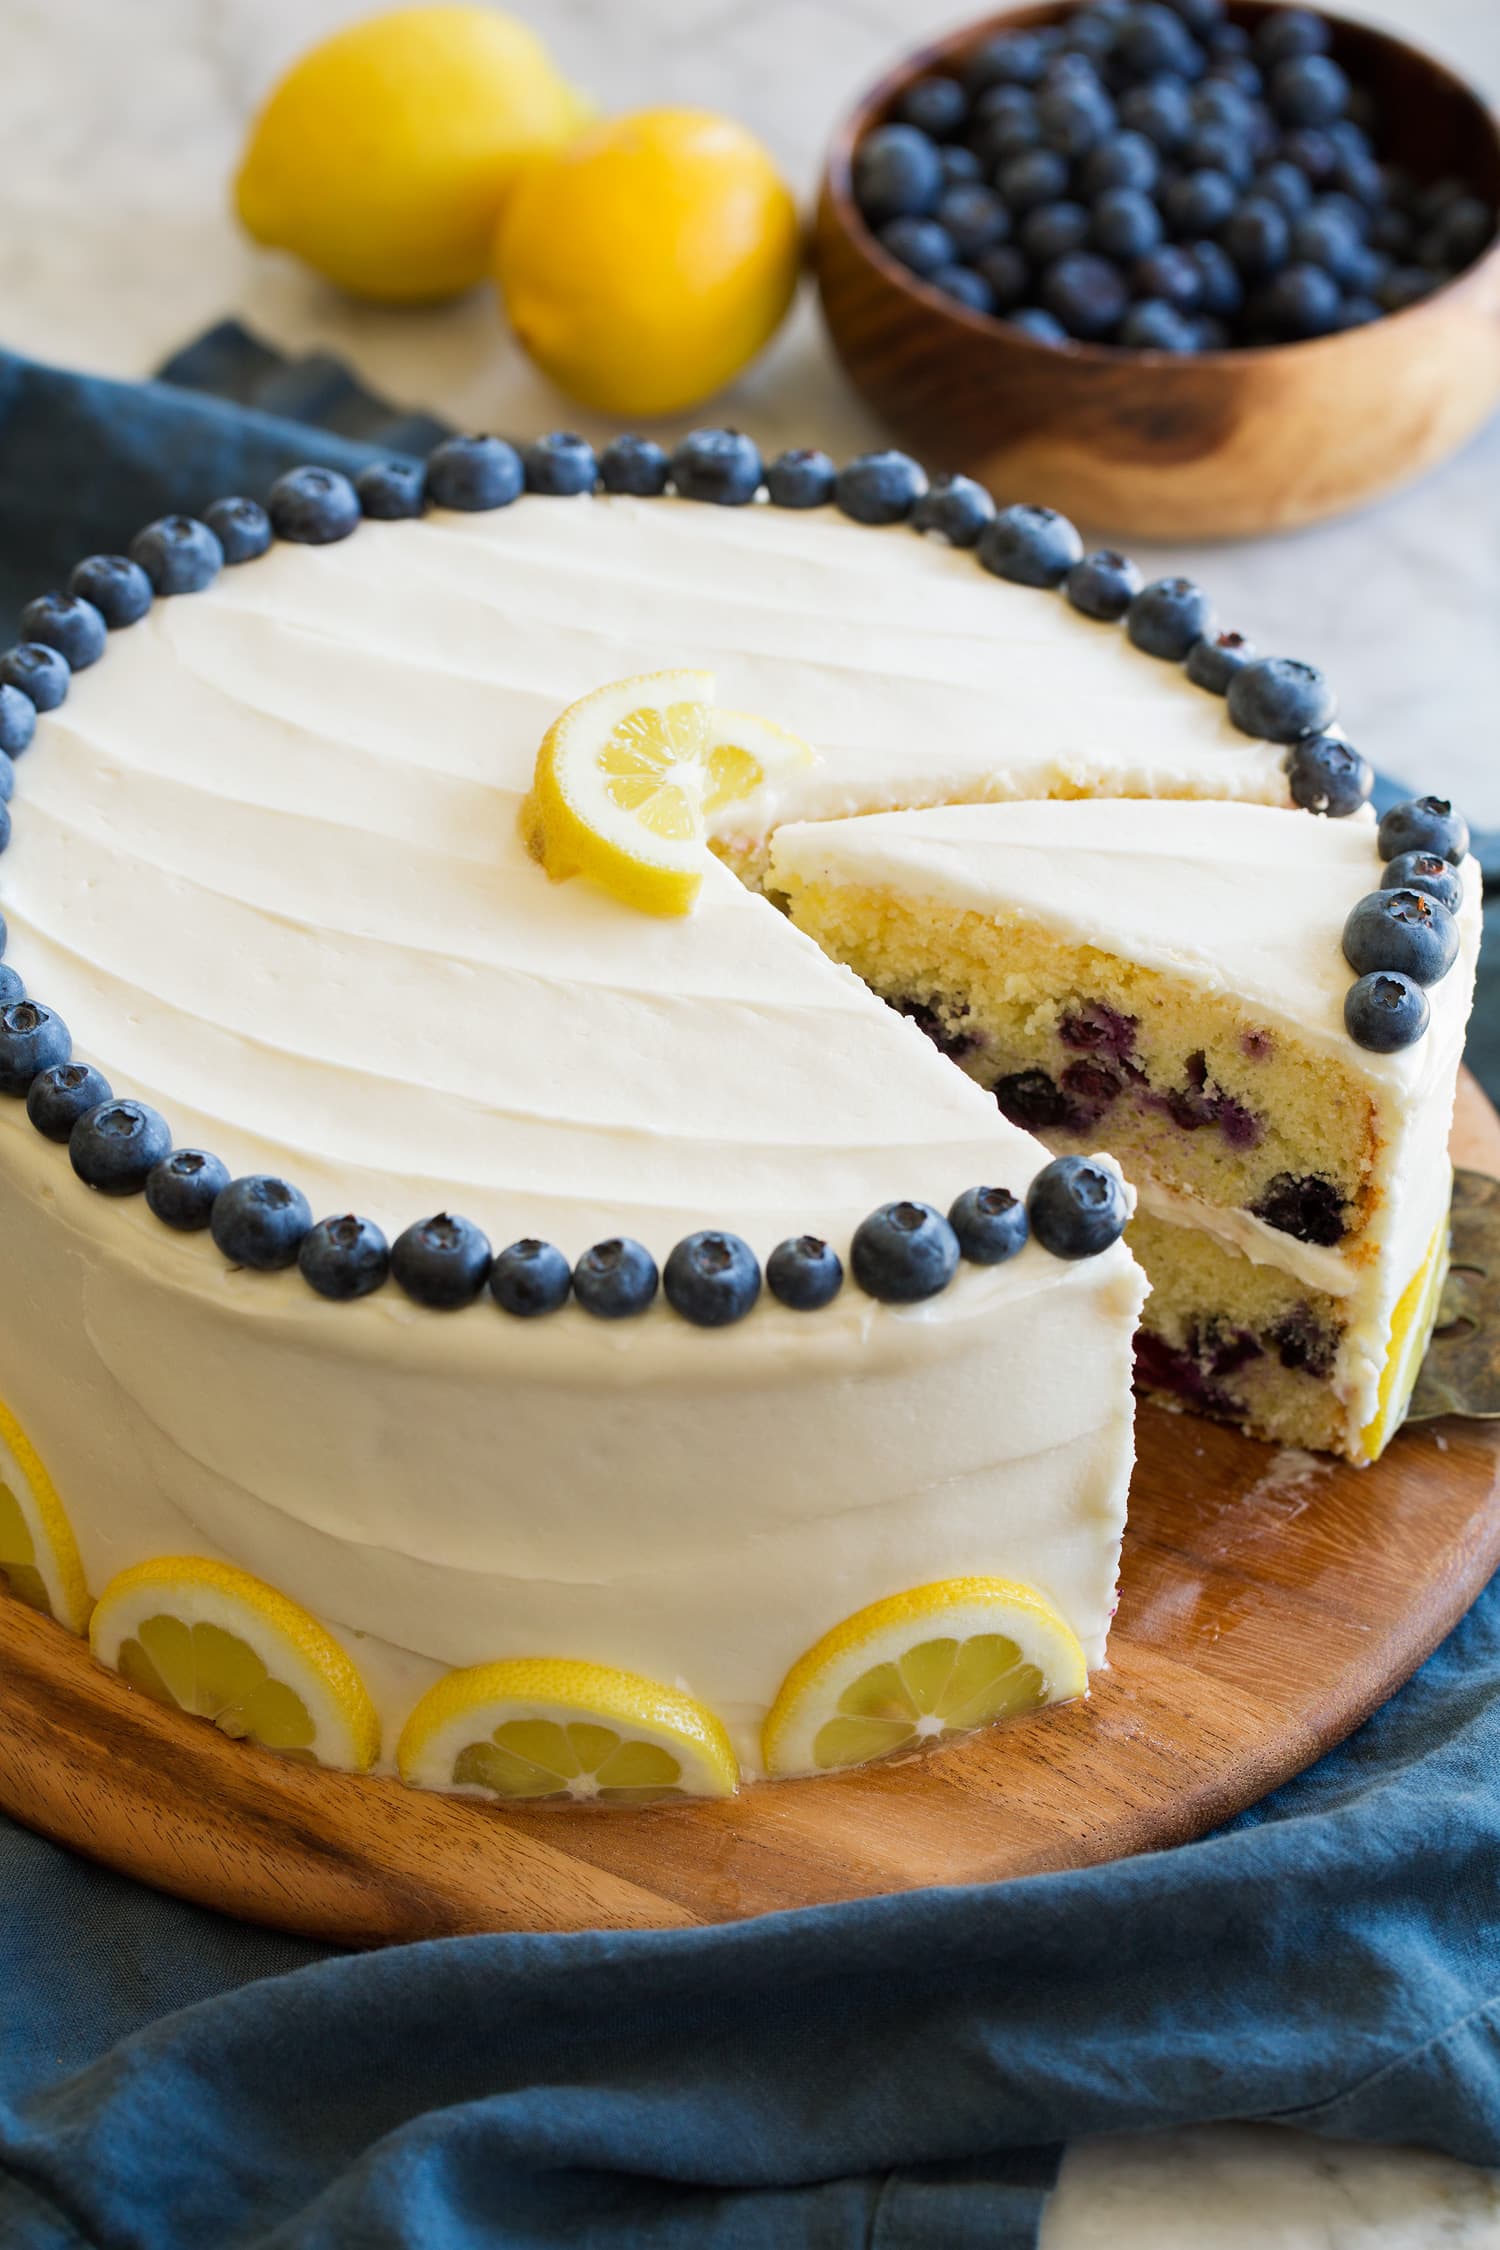 Whole cake with sliced removed. Garnished with fresh blueberries and lemon slices.